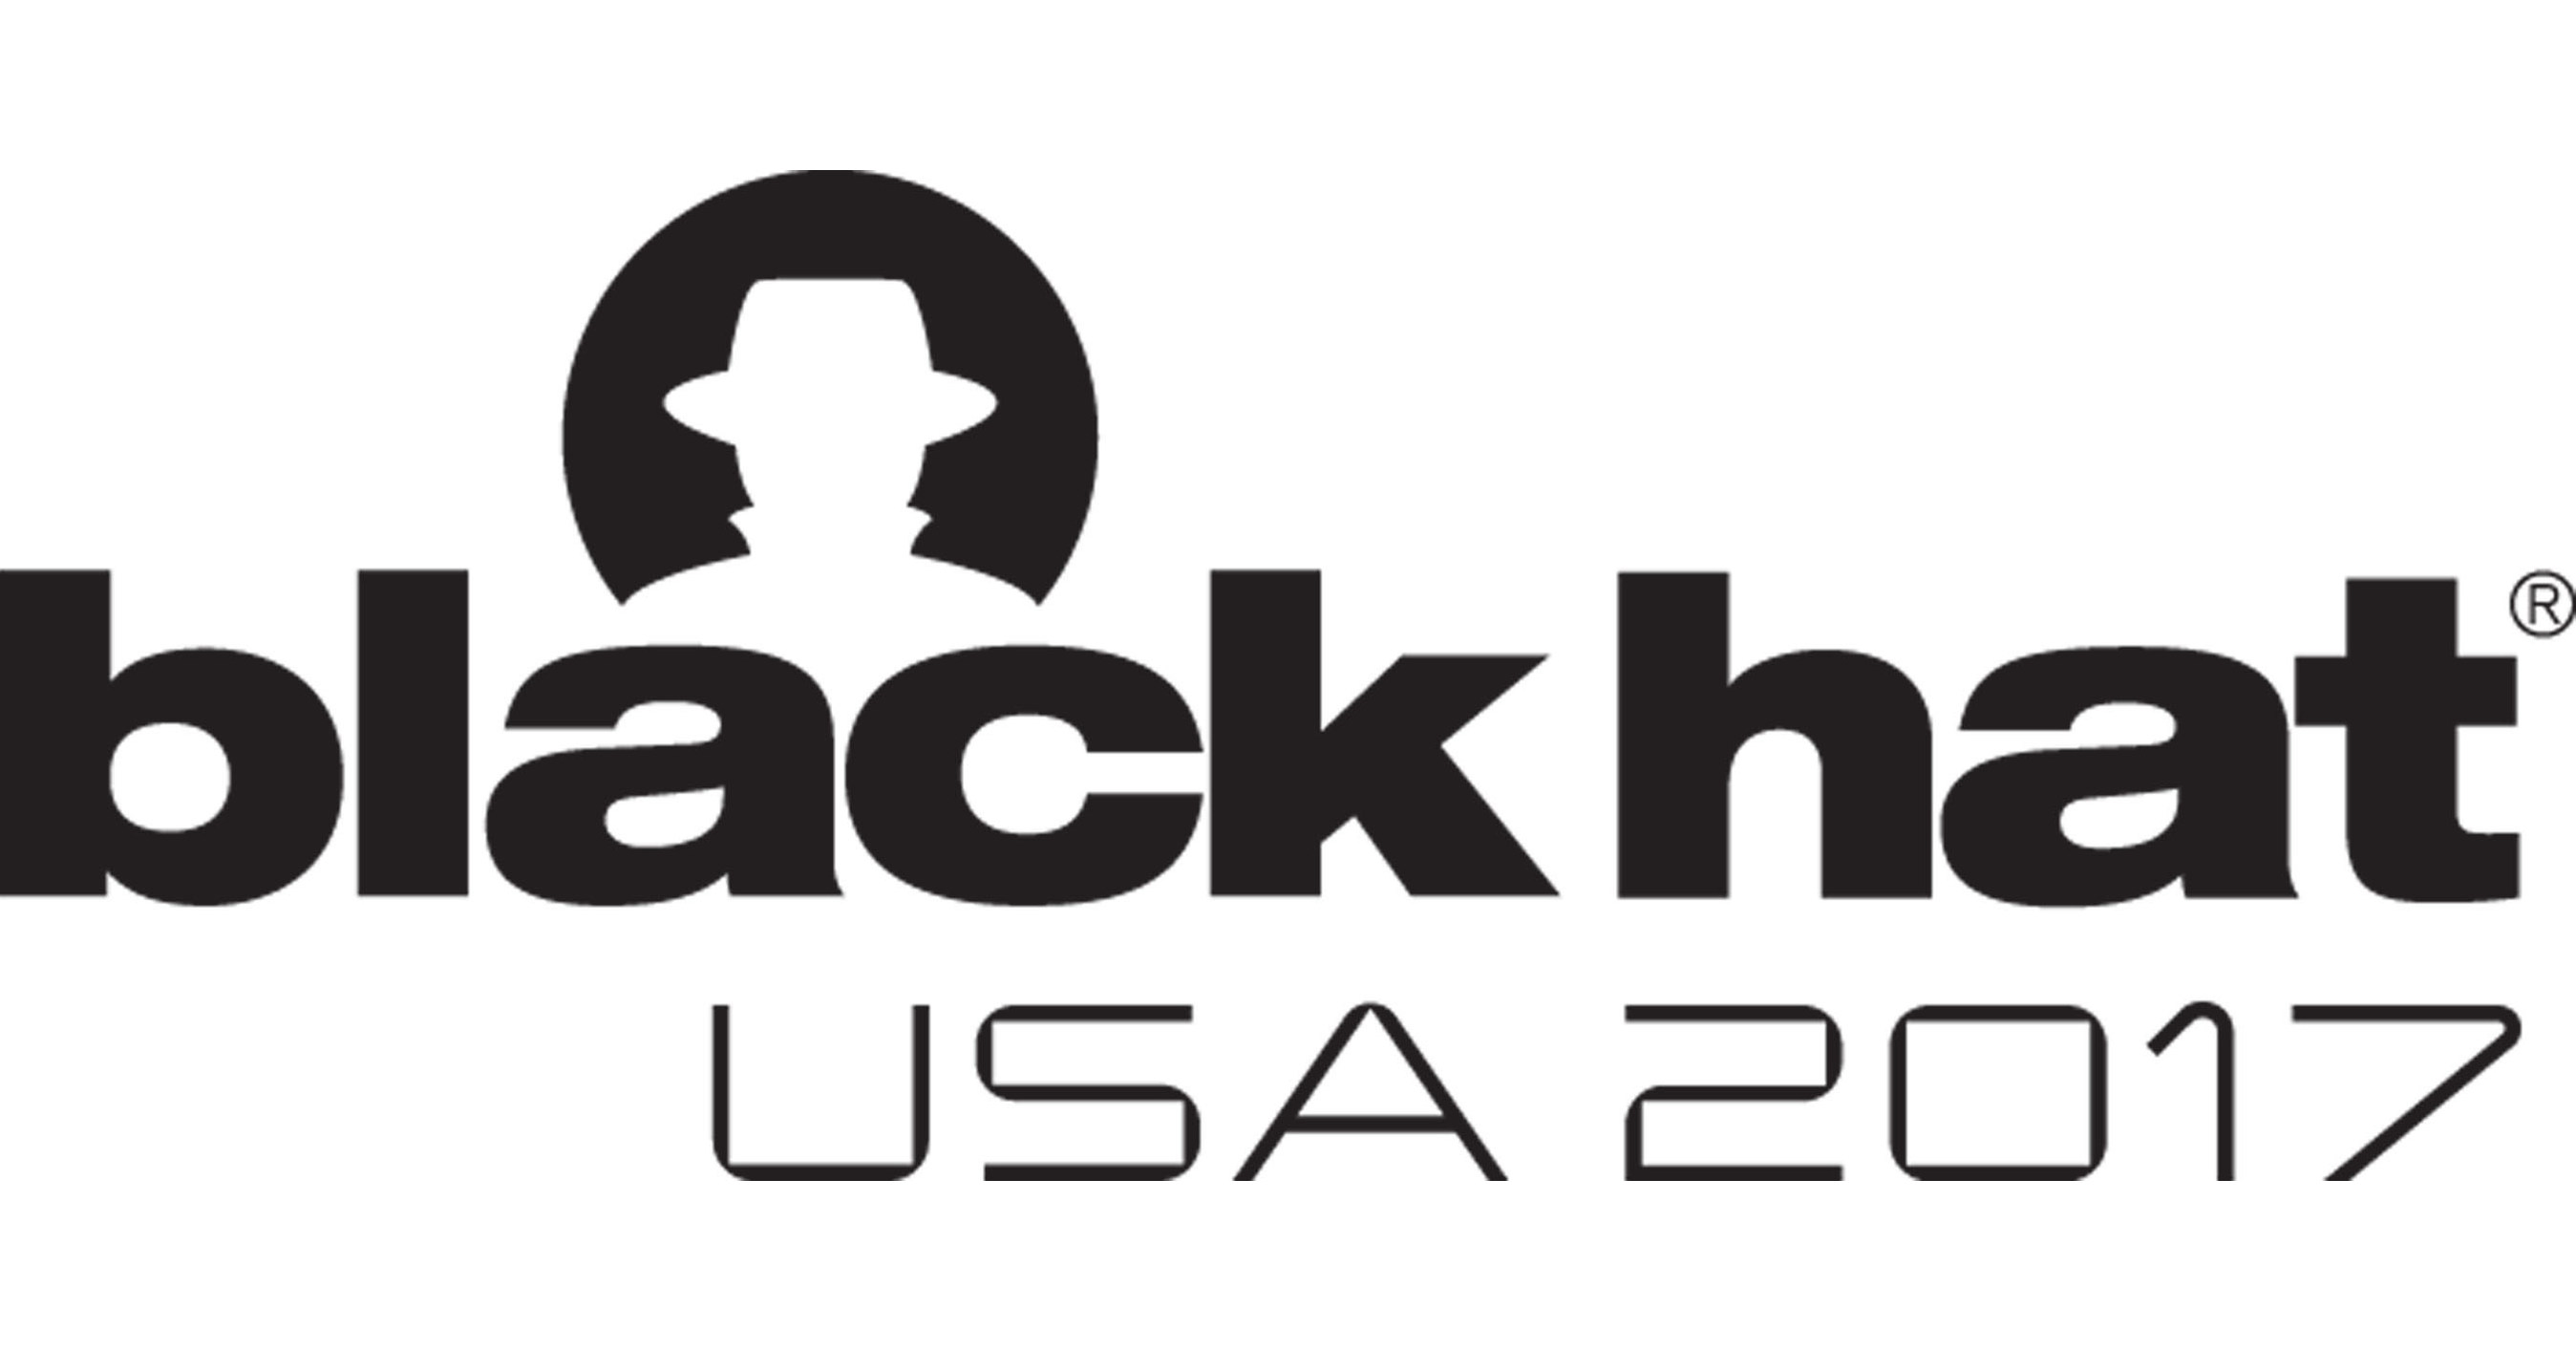 Black Hat Celebrates 20 Years with Record Breaking USA Event